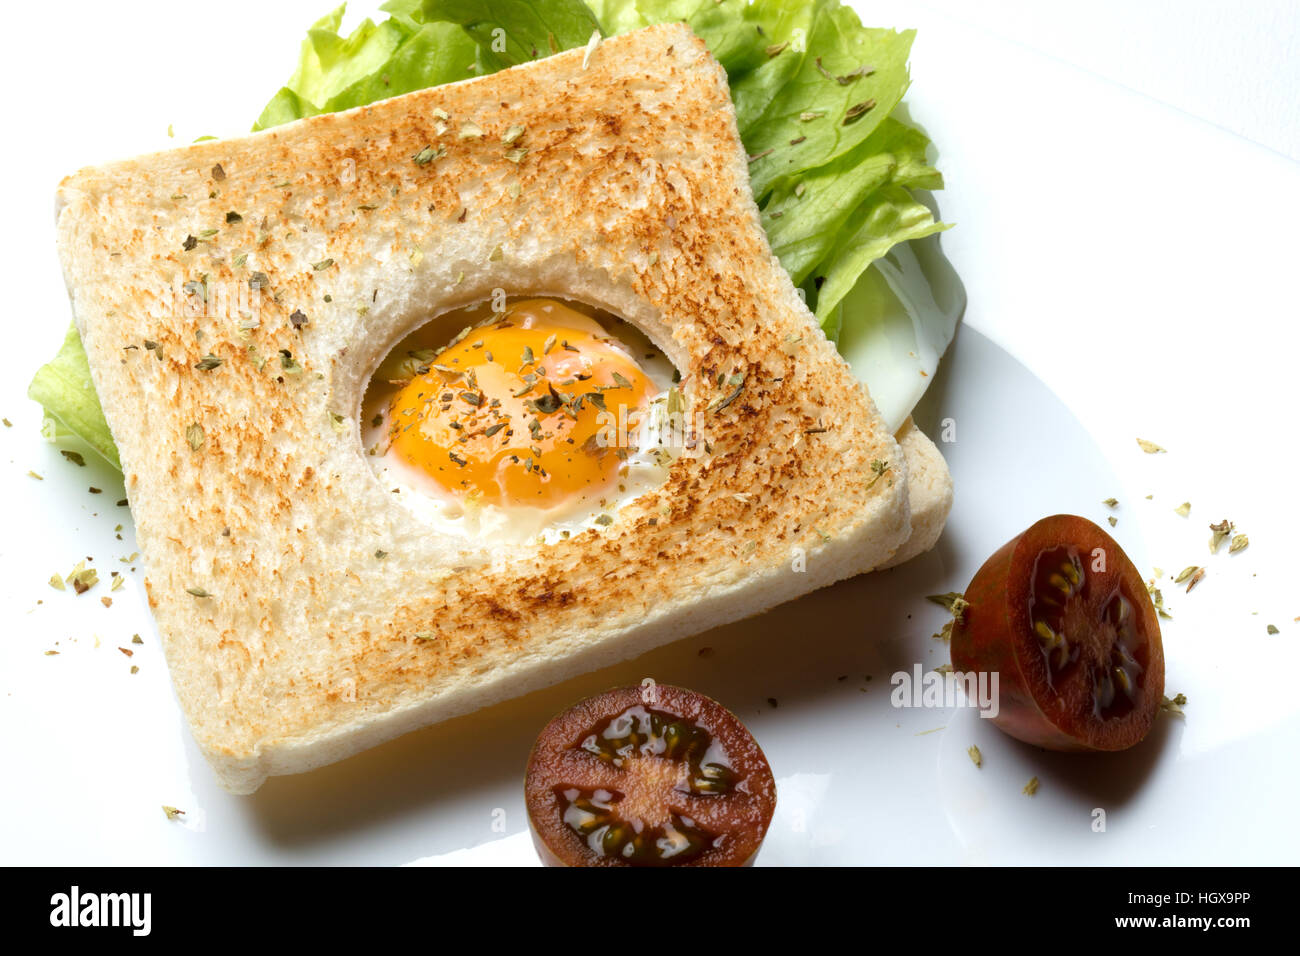 egg sandwich with lettuce and tomato in a beautiful food style Stock Photo